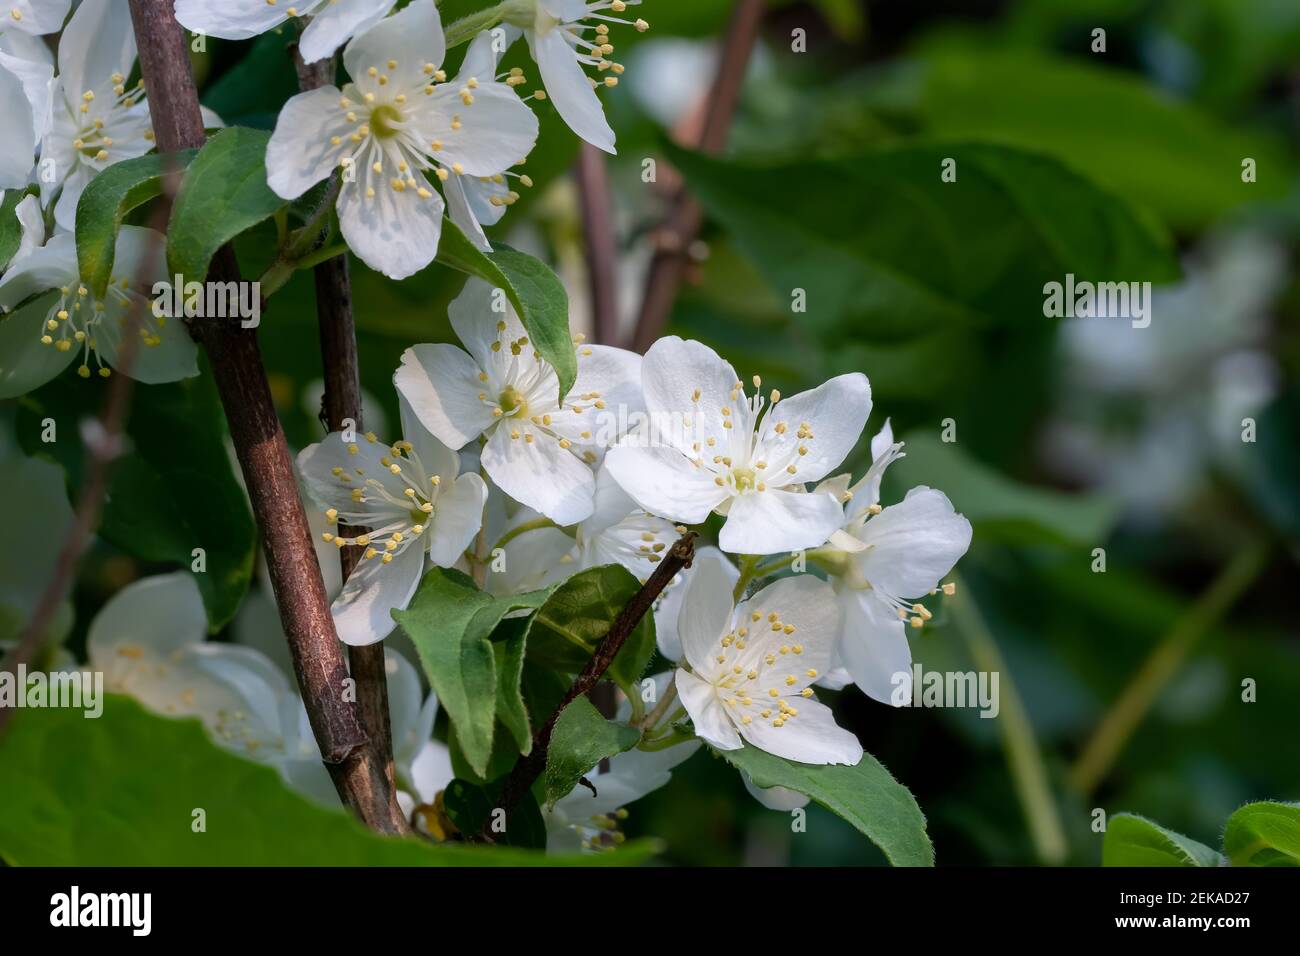 Delicate white flowers and green leaves of Philadelphus ornamental plant, known as sweet mock orange or English dogwood. Stock Photo